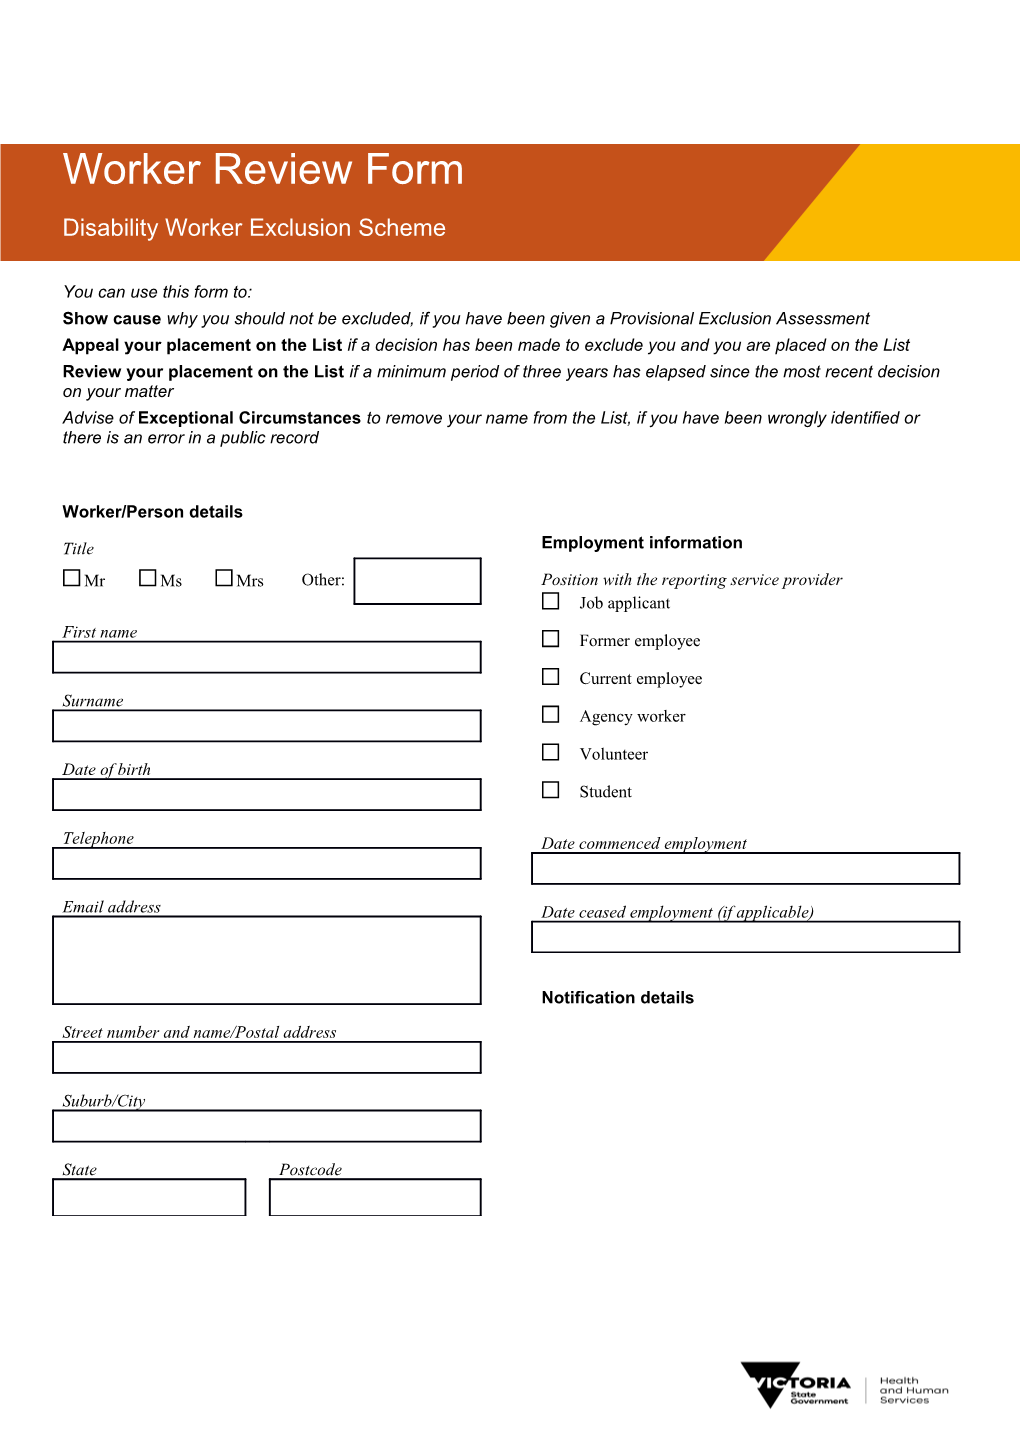 You Can Use This Form To